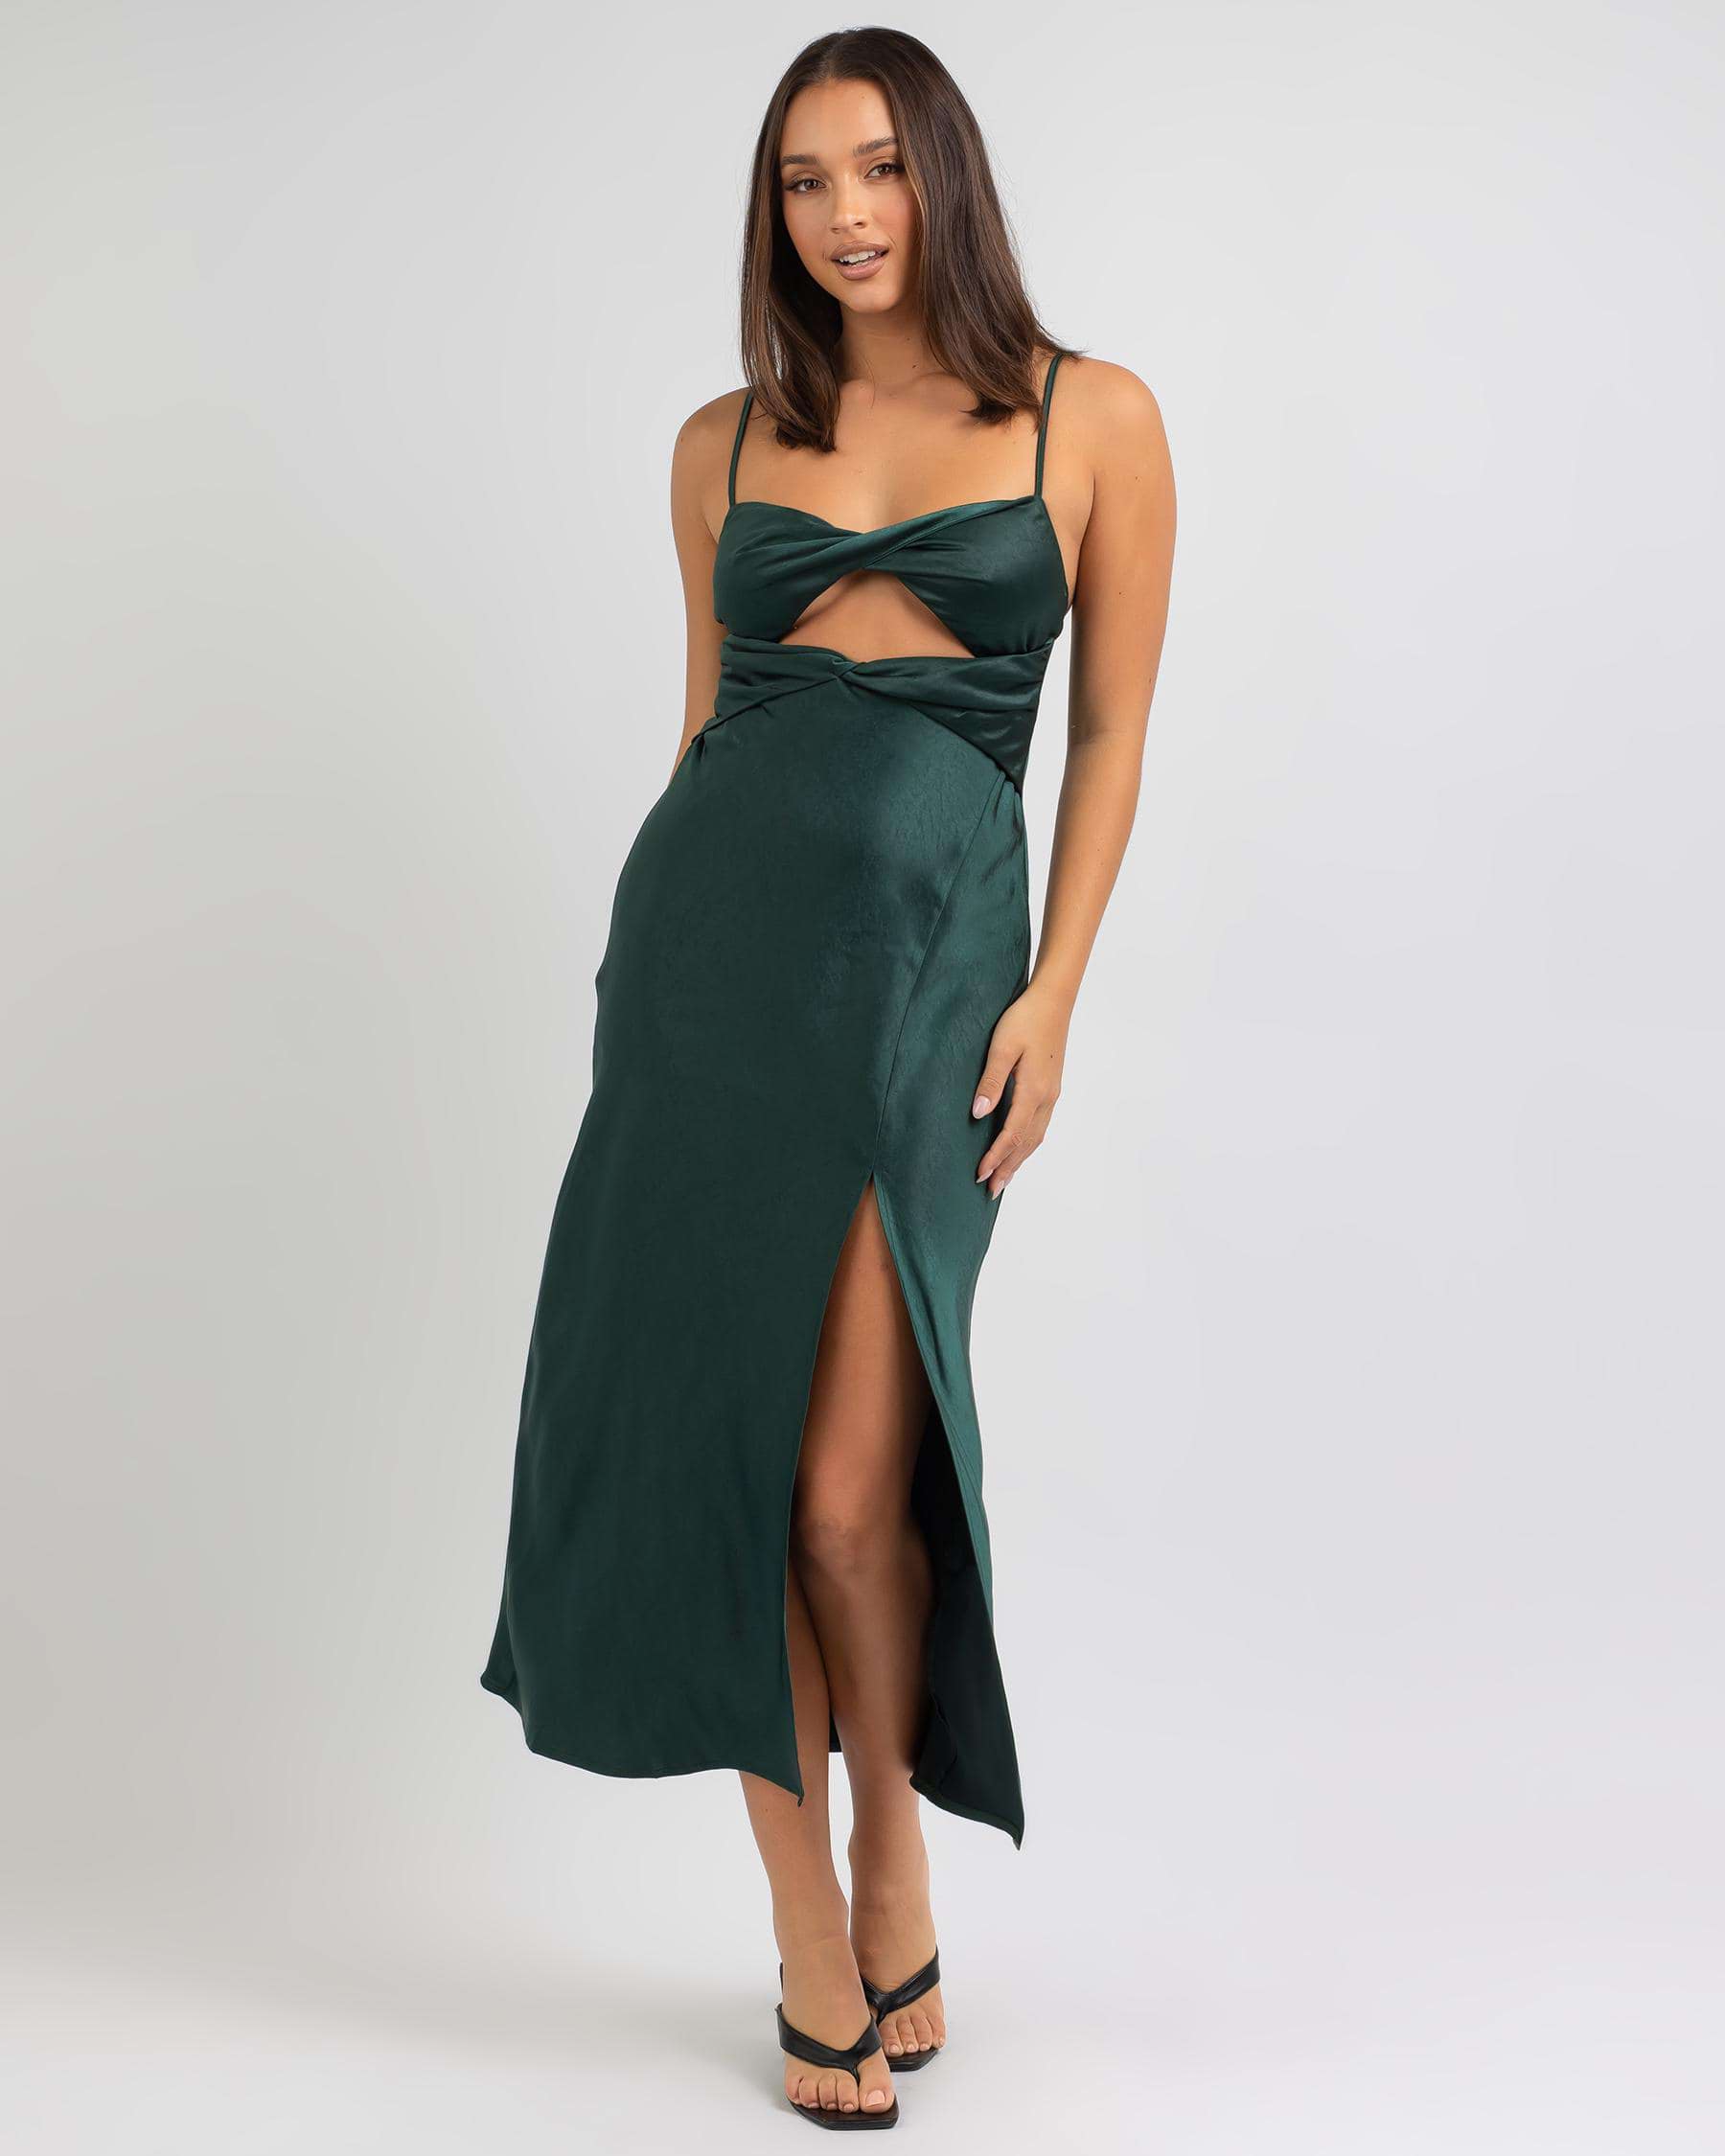 Shop Saints And Secrets Here To Stay Midi Dress In Jade - Fast Shipping ...